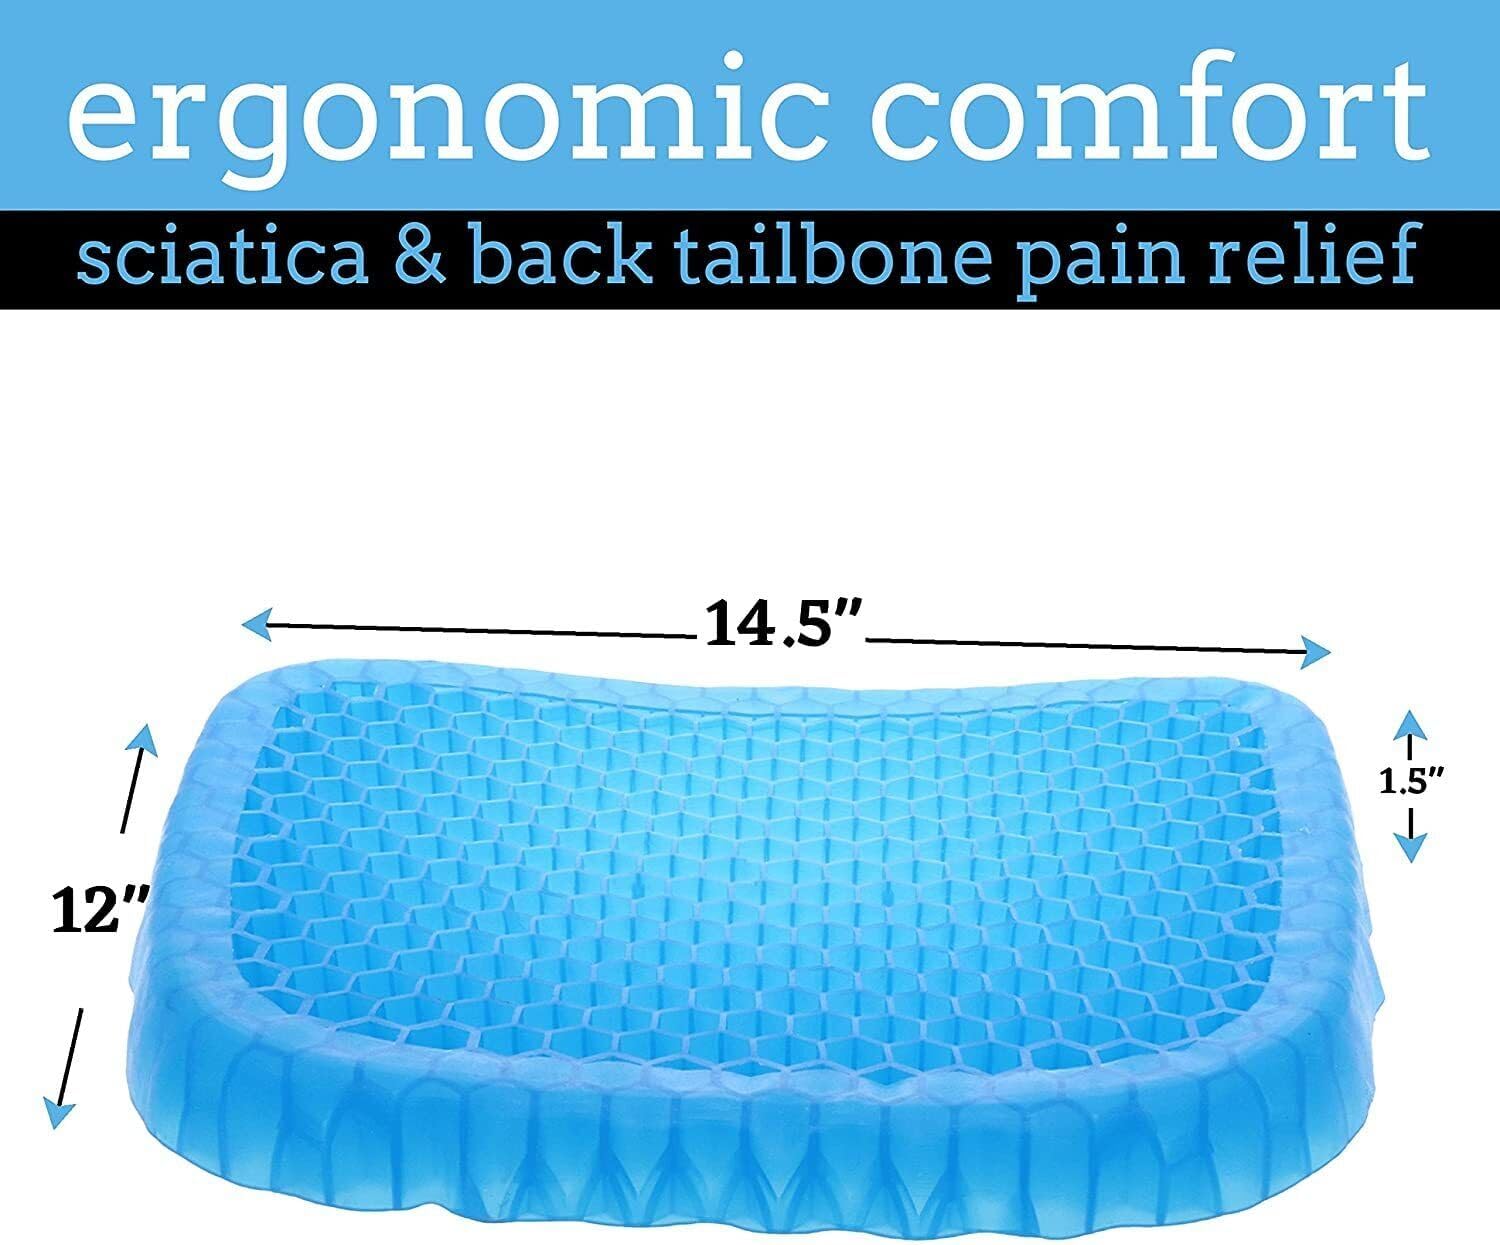 Gel Seat Cushion for Long Sitting - Portable Gel Cushion with Ergonomic Honeycomb Design - Small Size, Gel Seat Cushions for Pressure Relief Sores Effective for Sedentary Activities